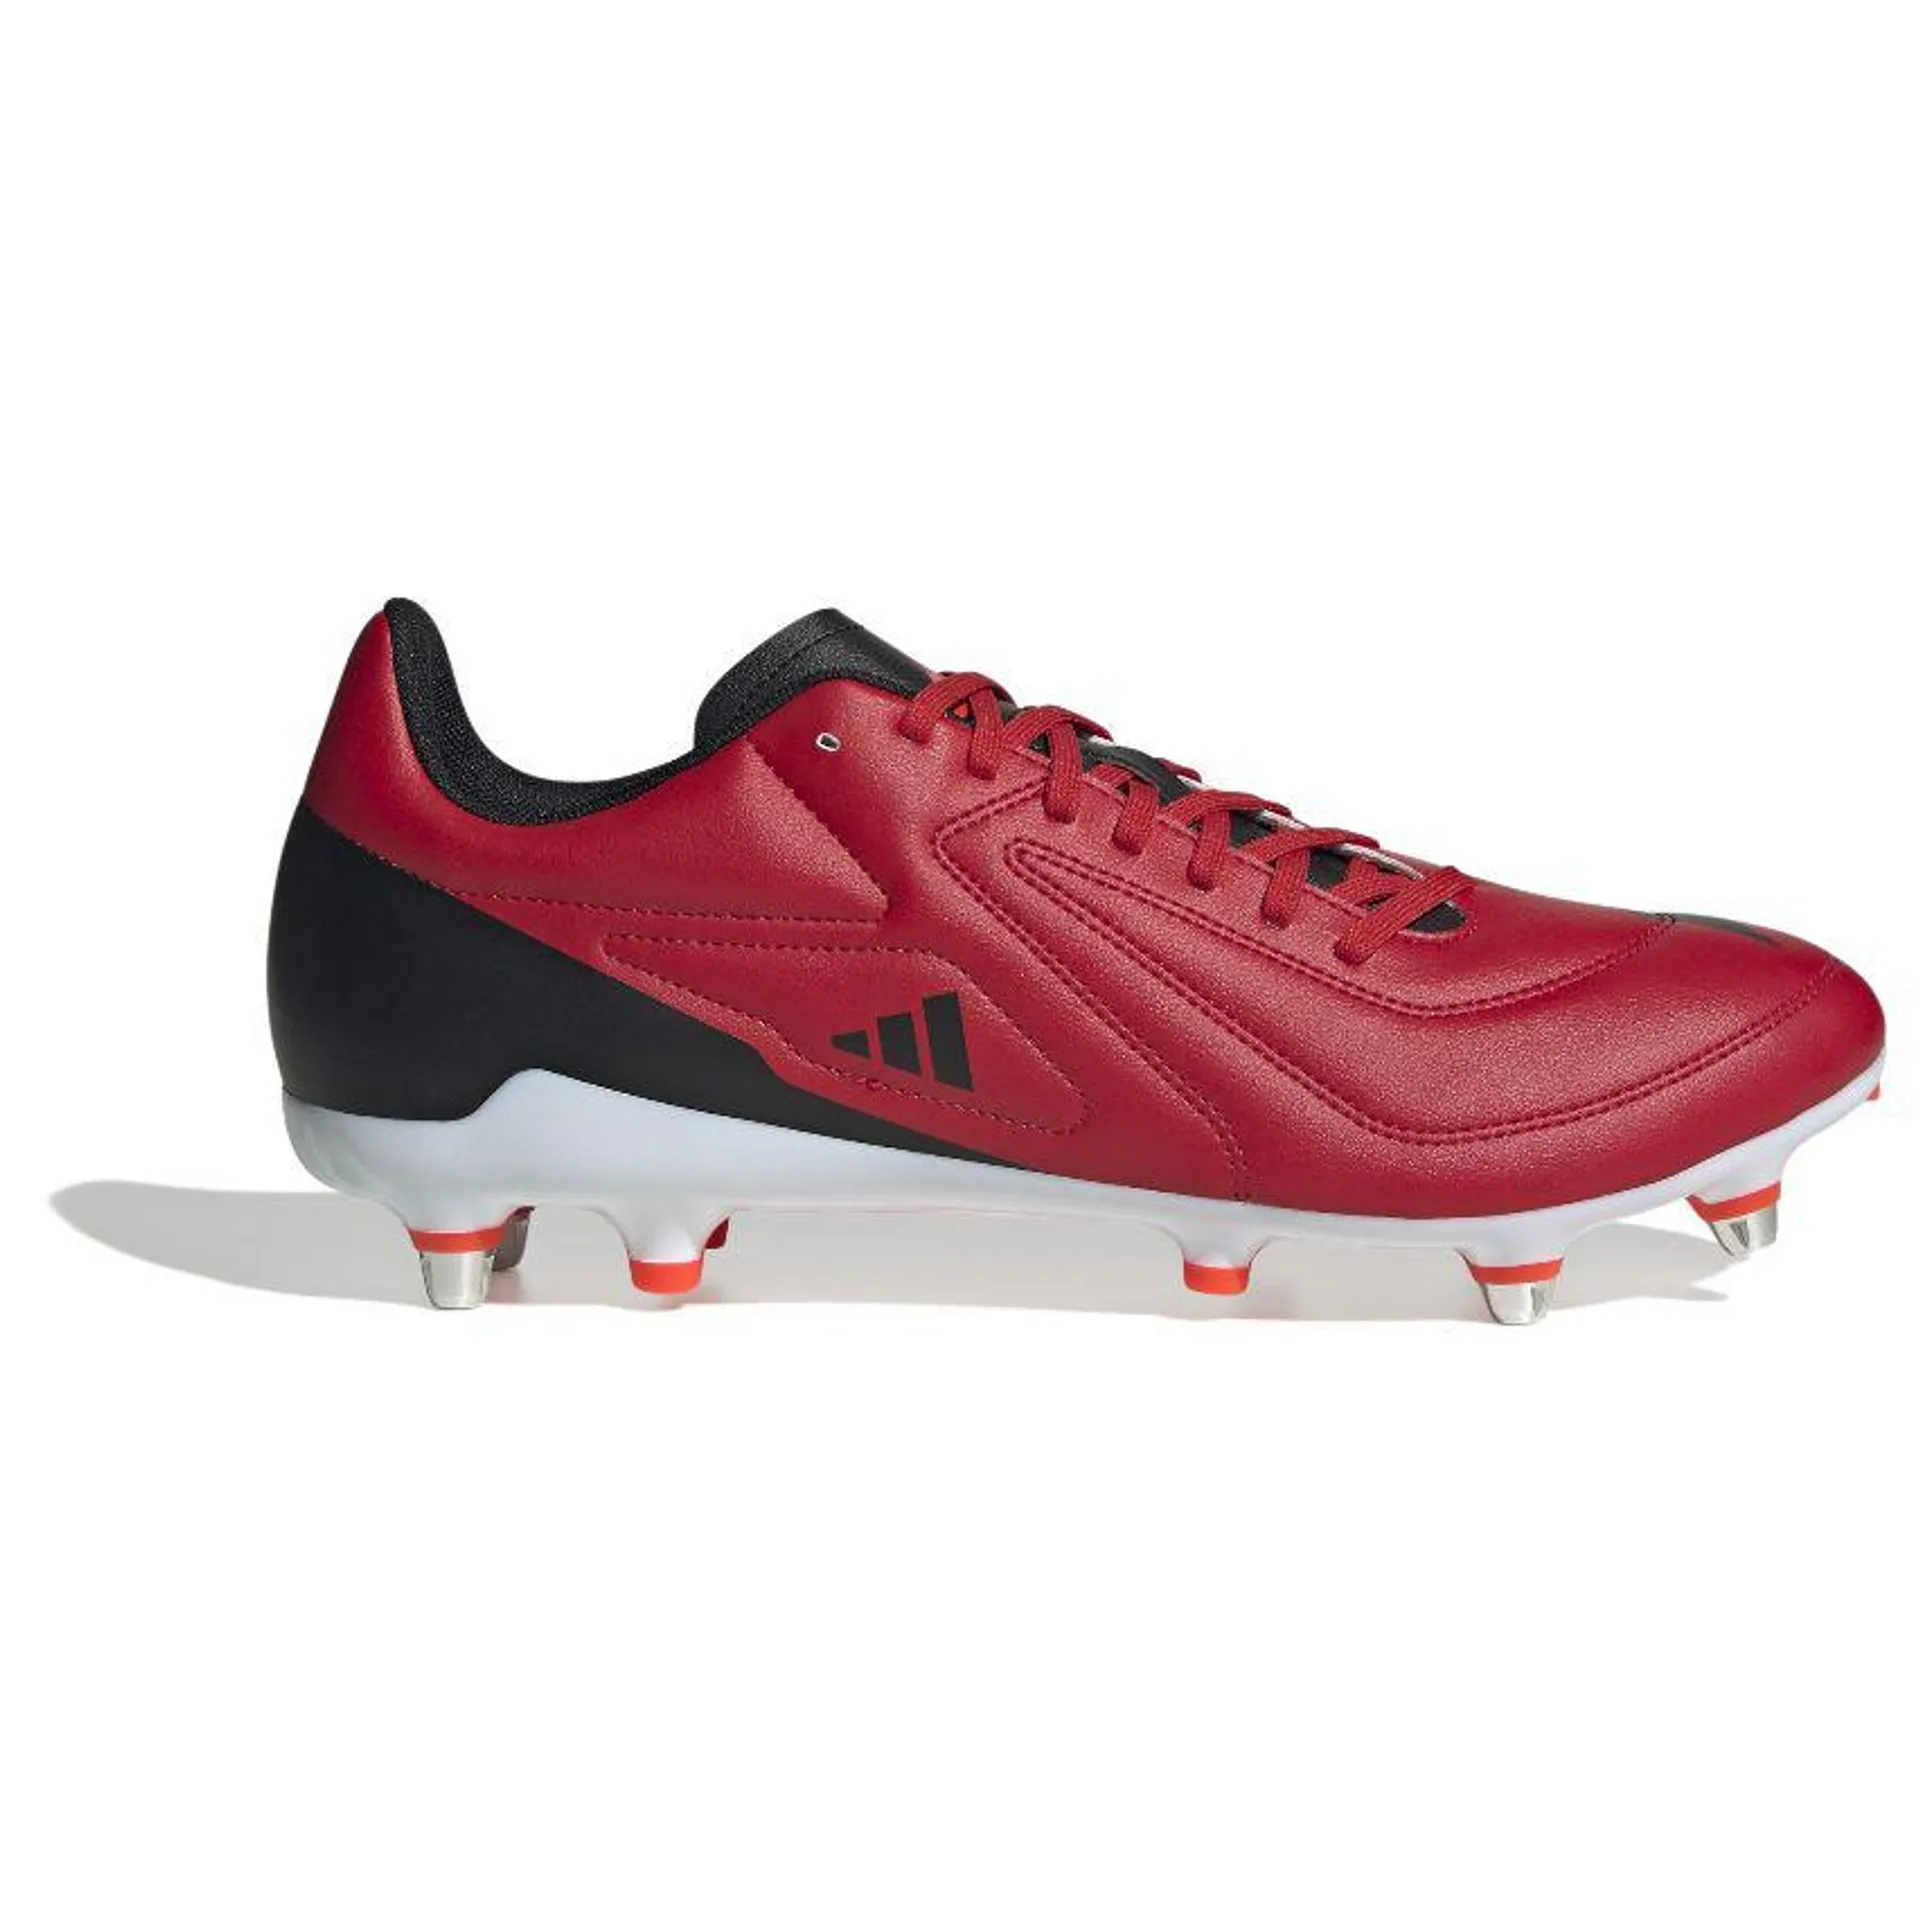 Chaussures De Rugby RS15 SG Crampons Hybrides Tout Terrain Rouge - Adidas